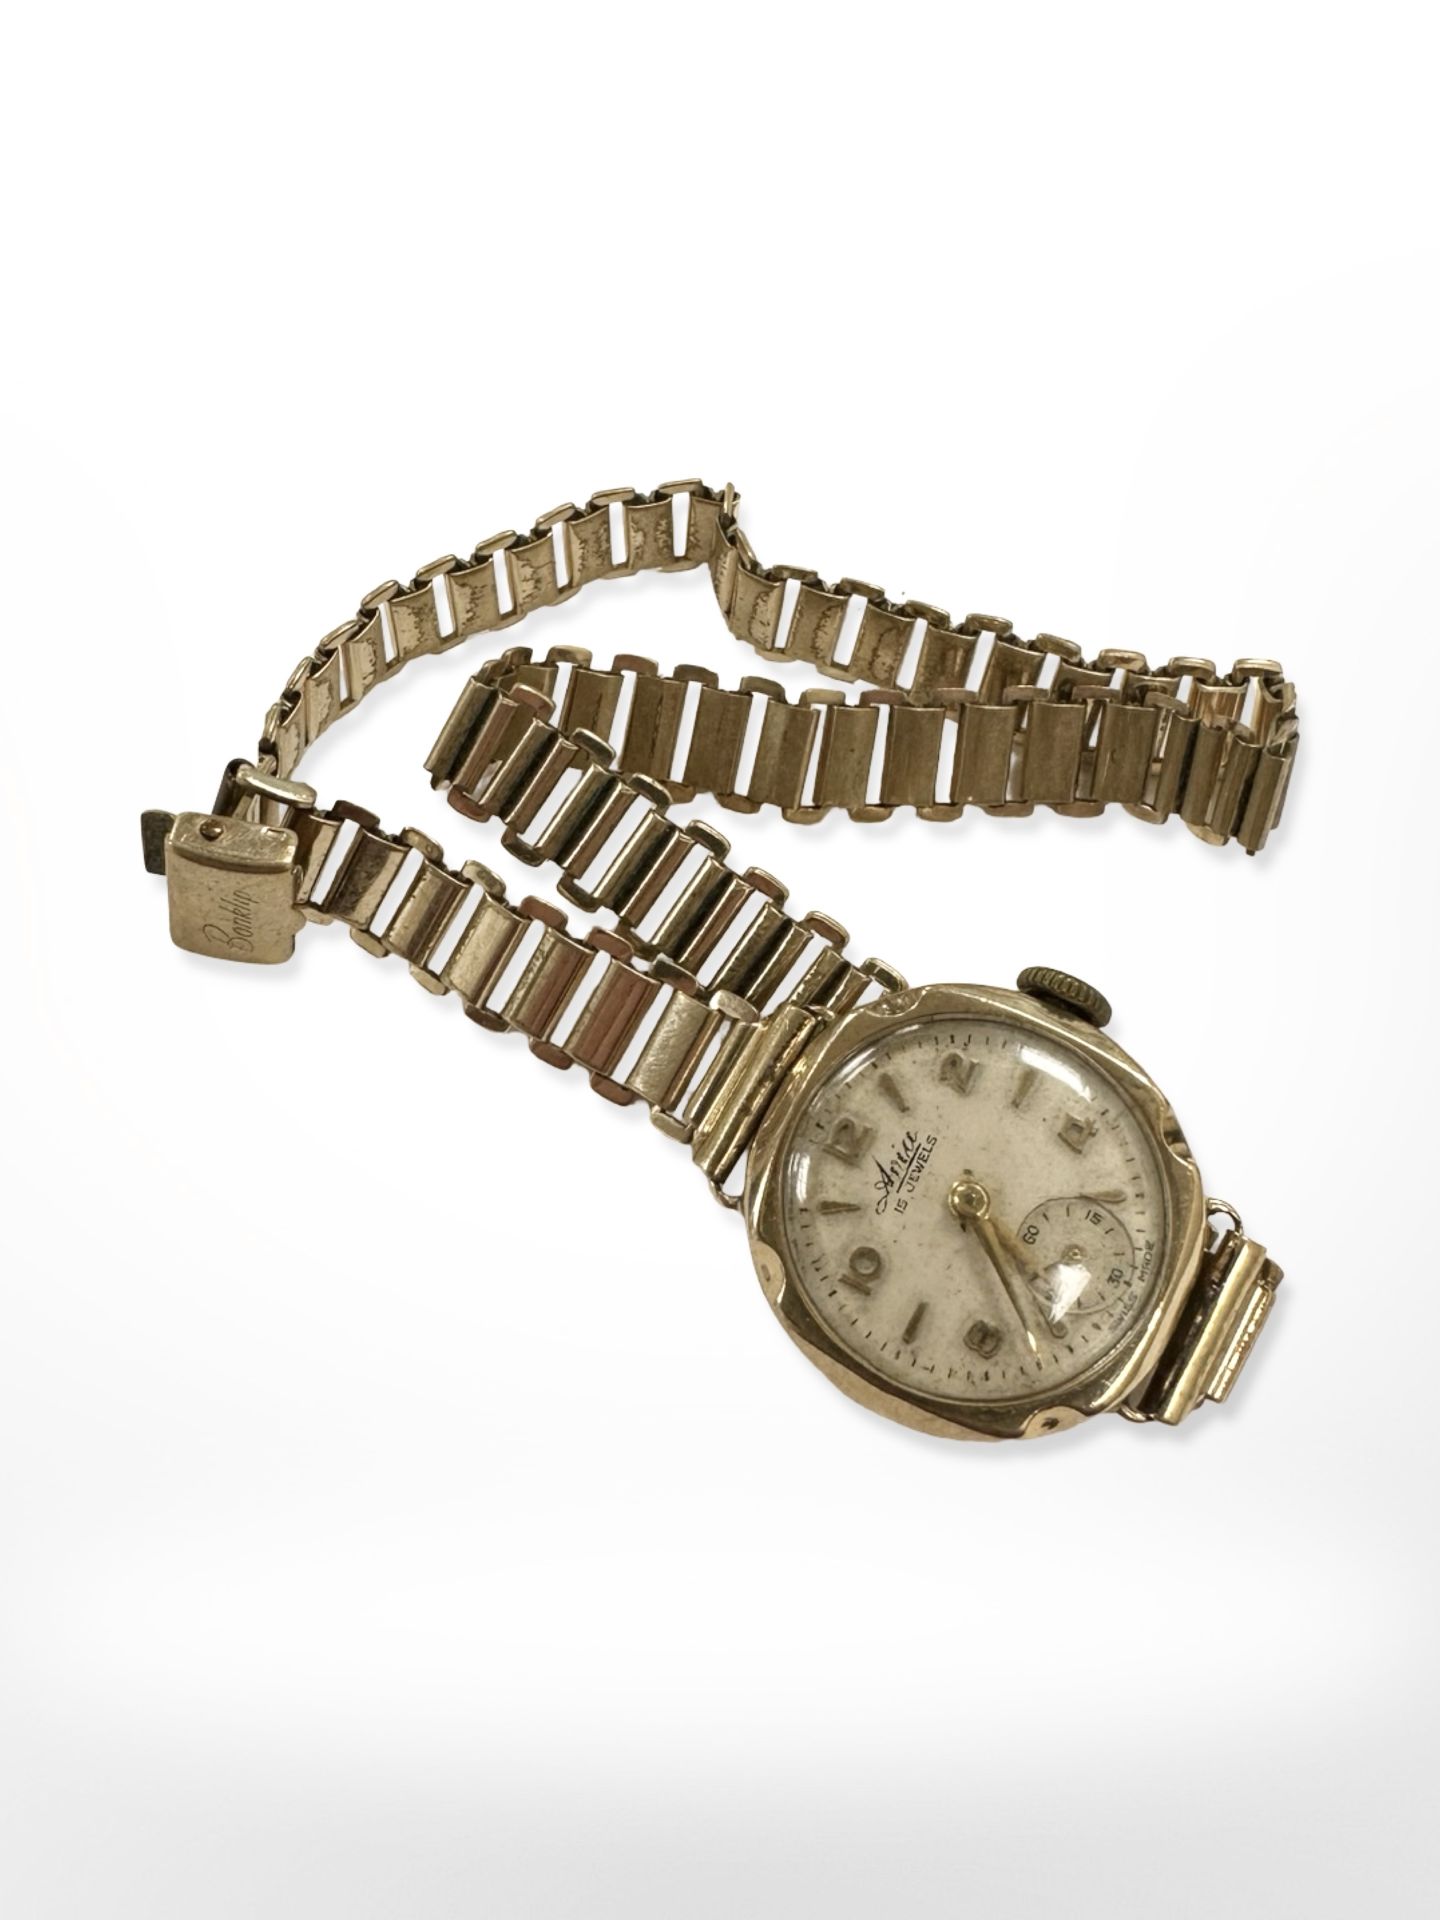 A Lady's 9ct yellow gold Avia wristwatch on gold plated strap